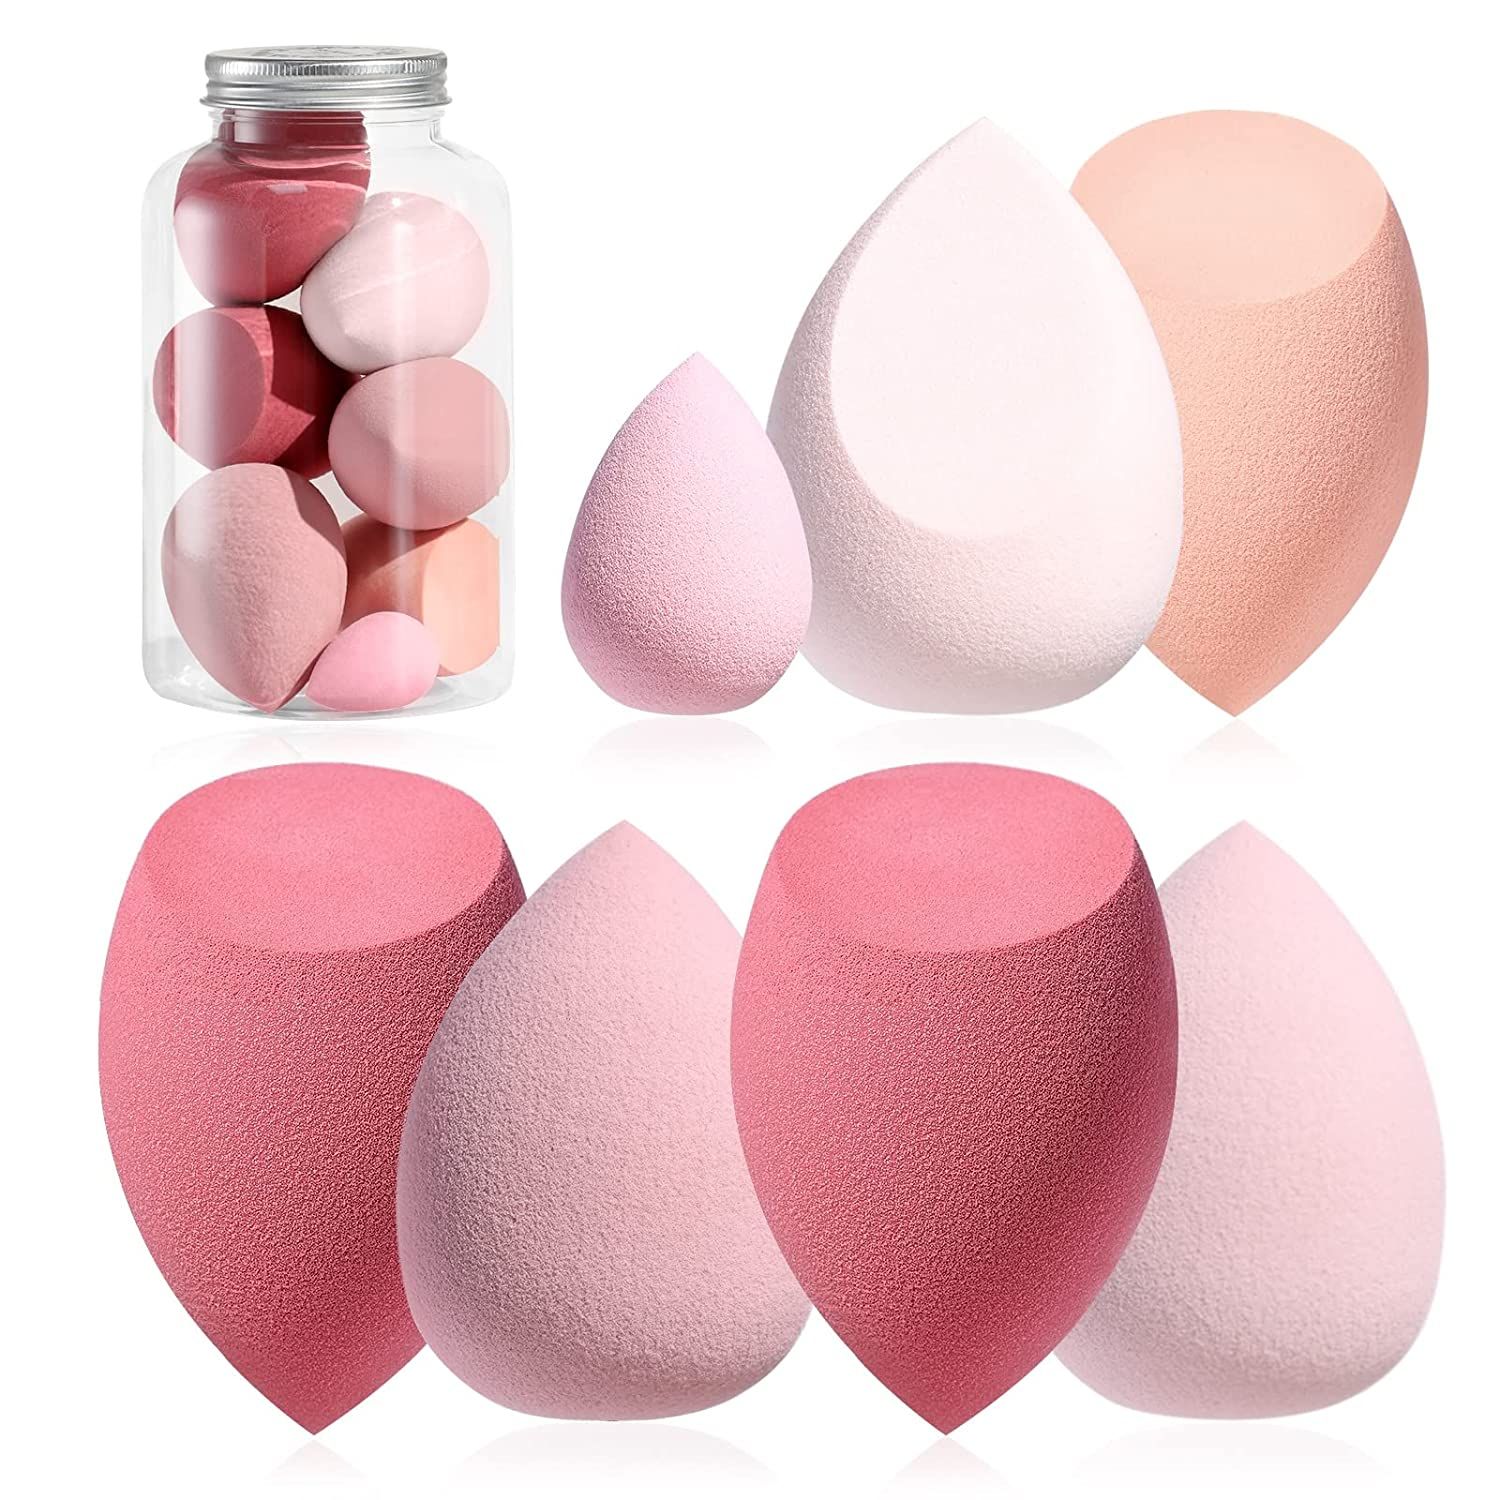 Makeup Sponge Set BS-MALL Blender Sponges 7 Pcs for Liquid, Cream, and Powder, Multi-colored with... | Amazon (US)